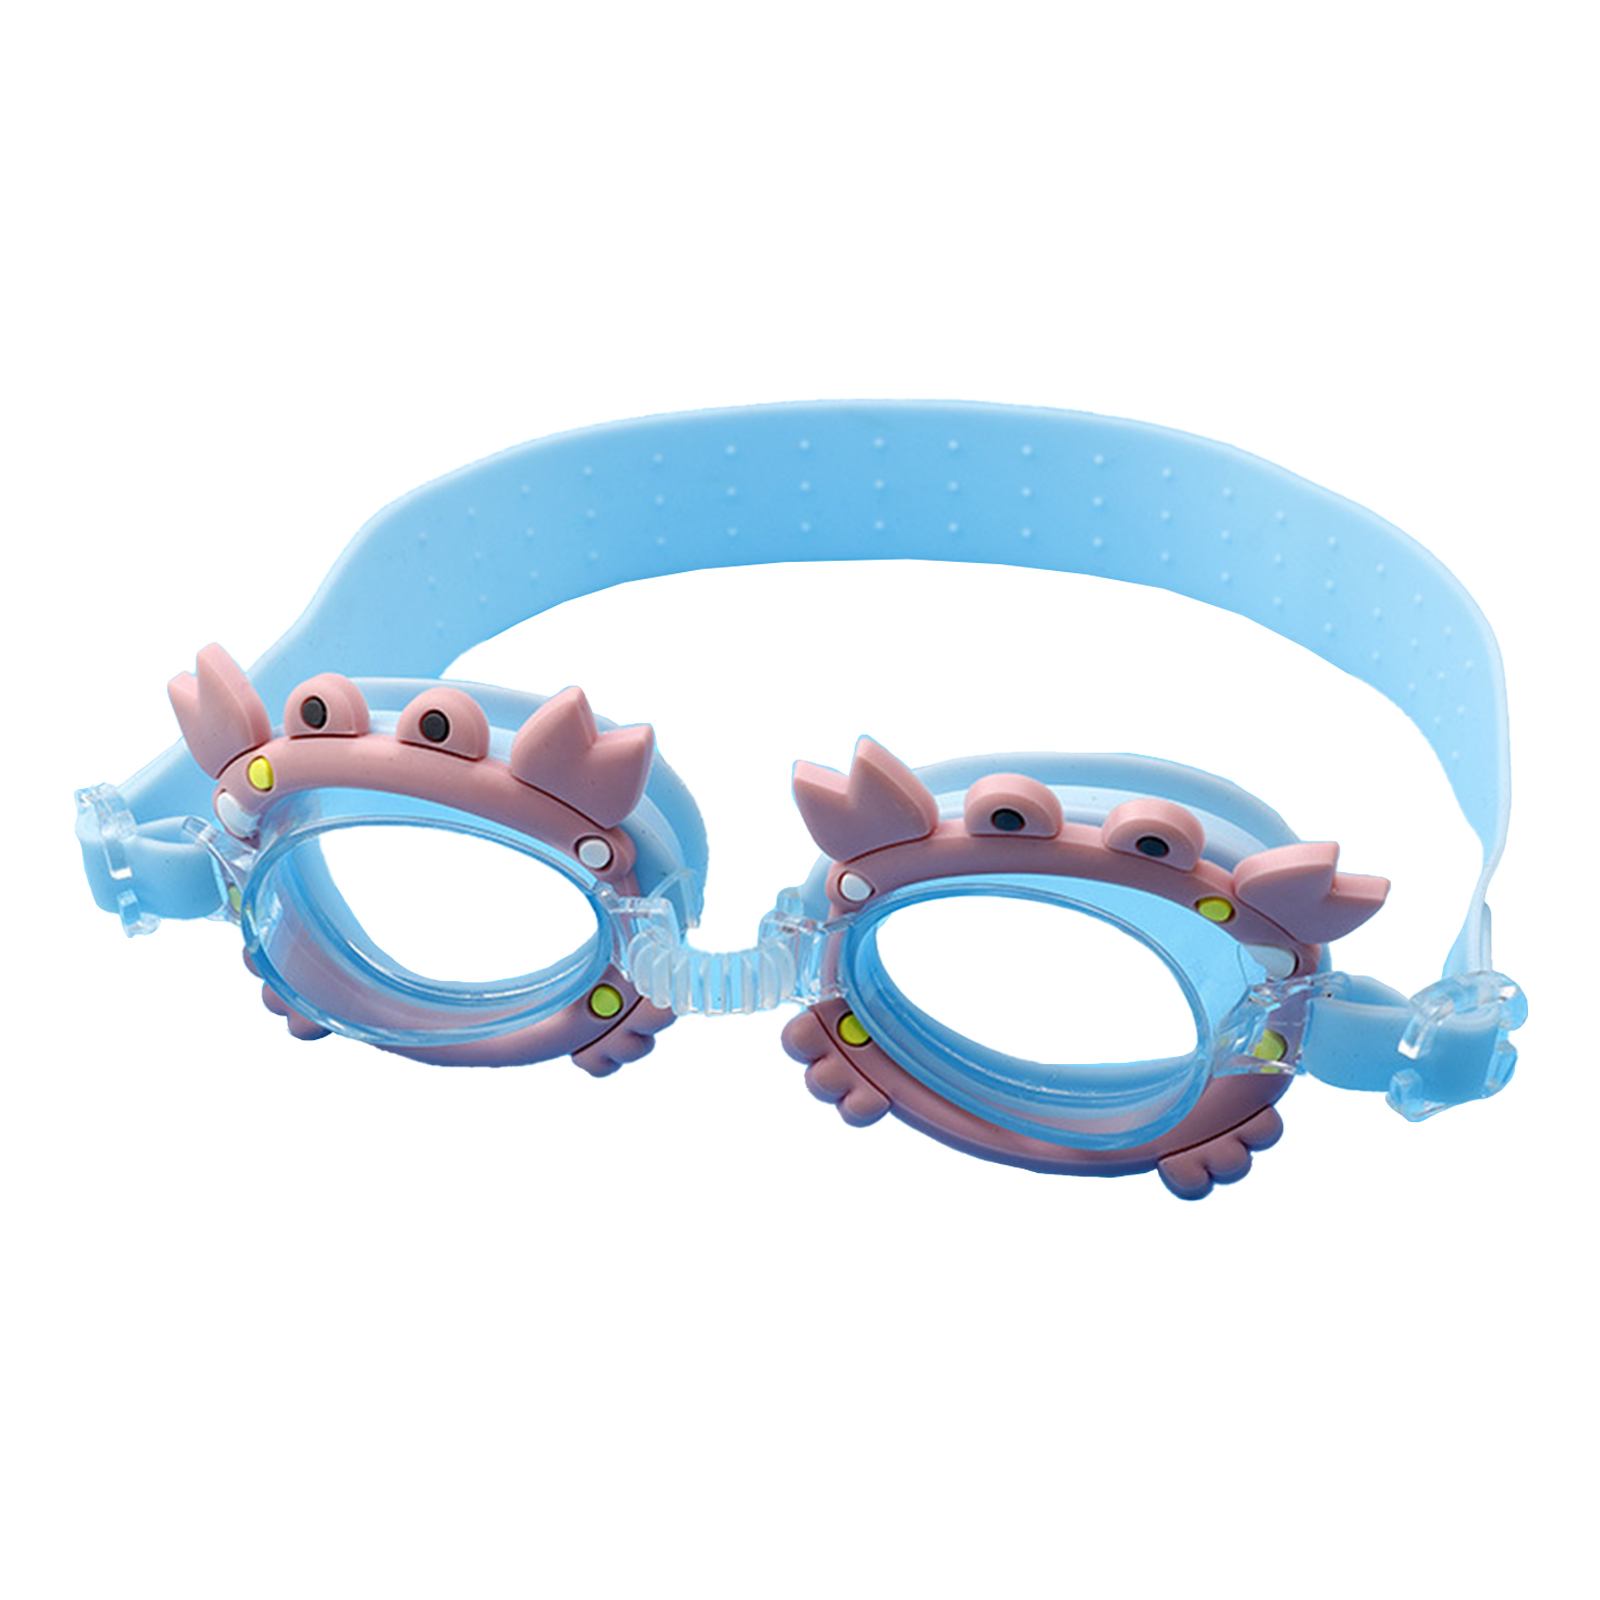 Kids Cartoon Swimming Goggles Professional Waterproof Anti-fog Soft Silicone Diving Glasses For Boys Girls